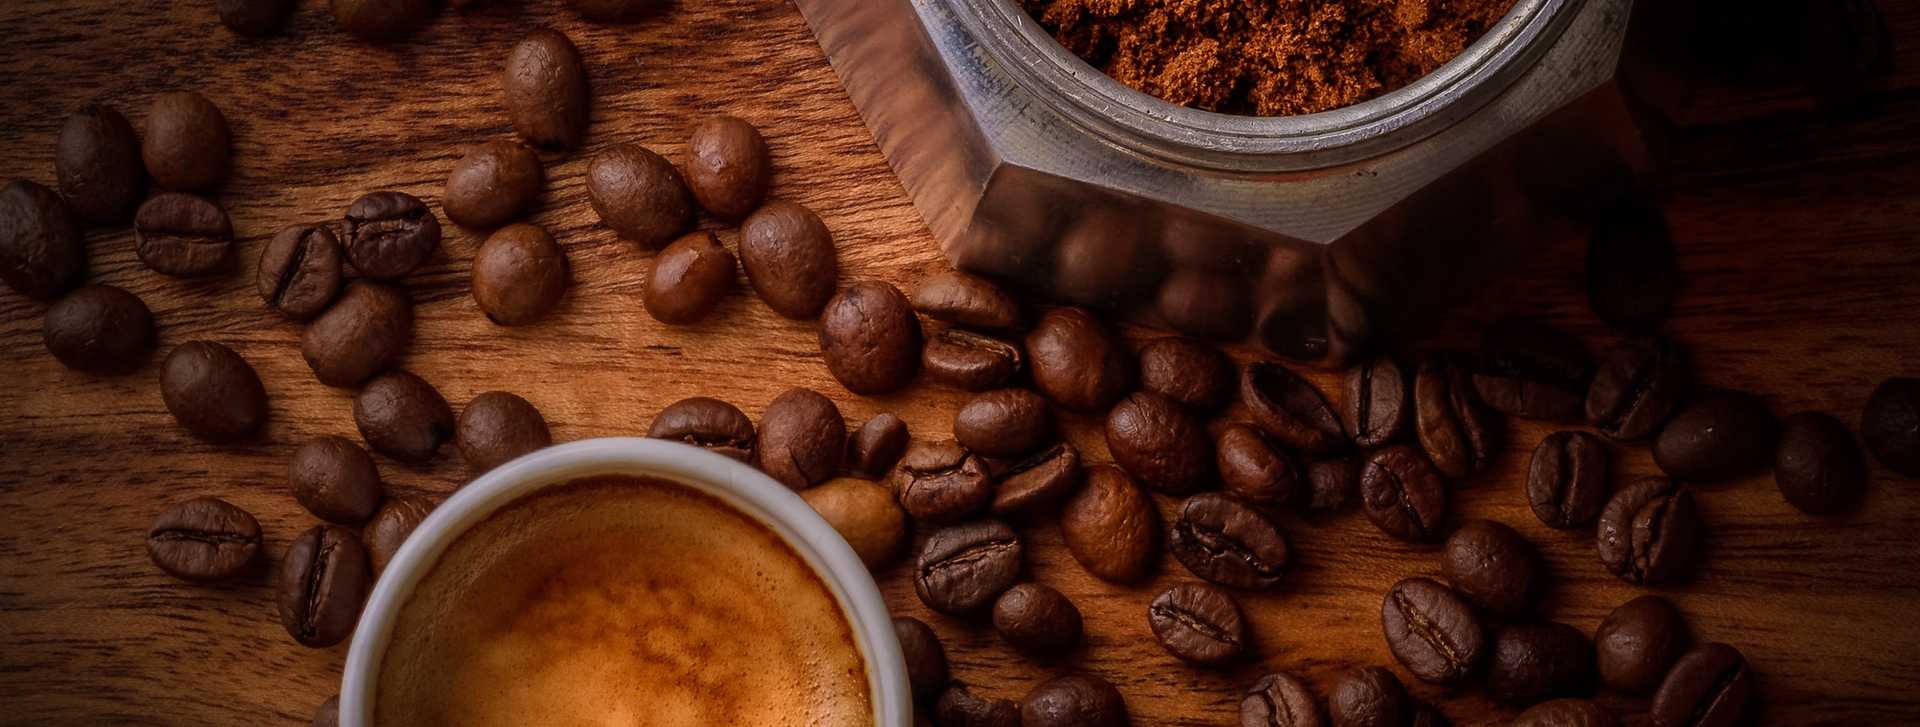 Coffee beans and ground coffee on a wood countertop